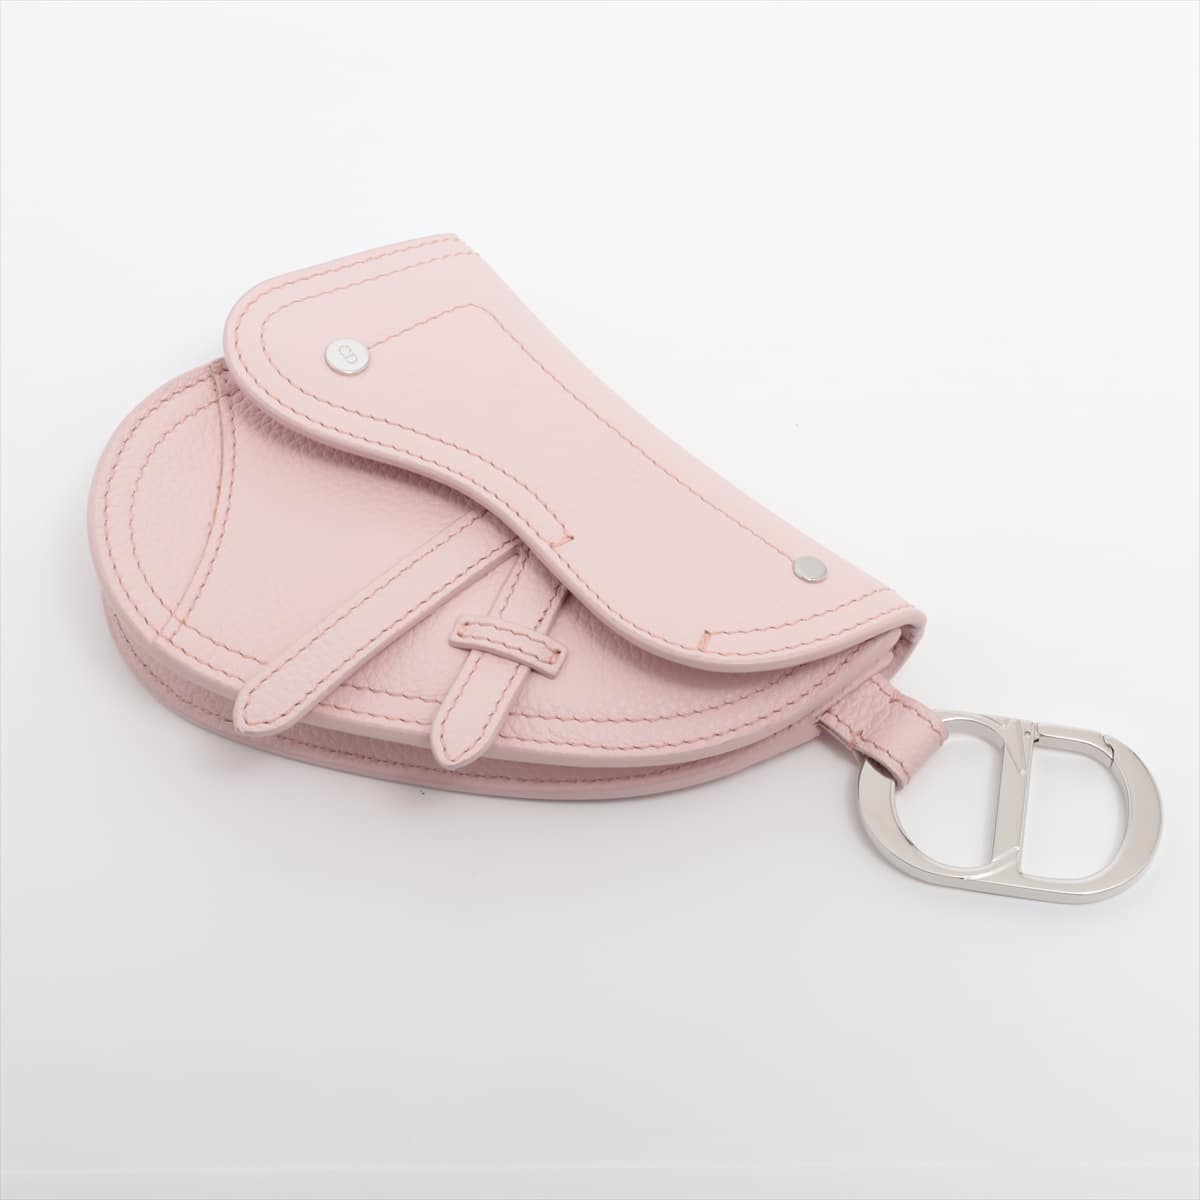 Christian Dior Saddle Pouch Pink